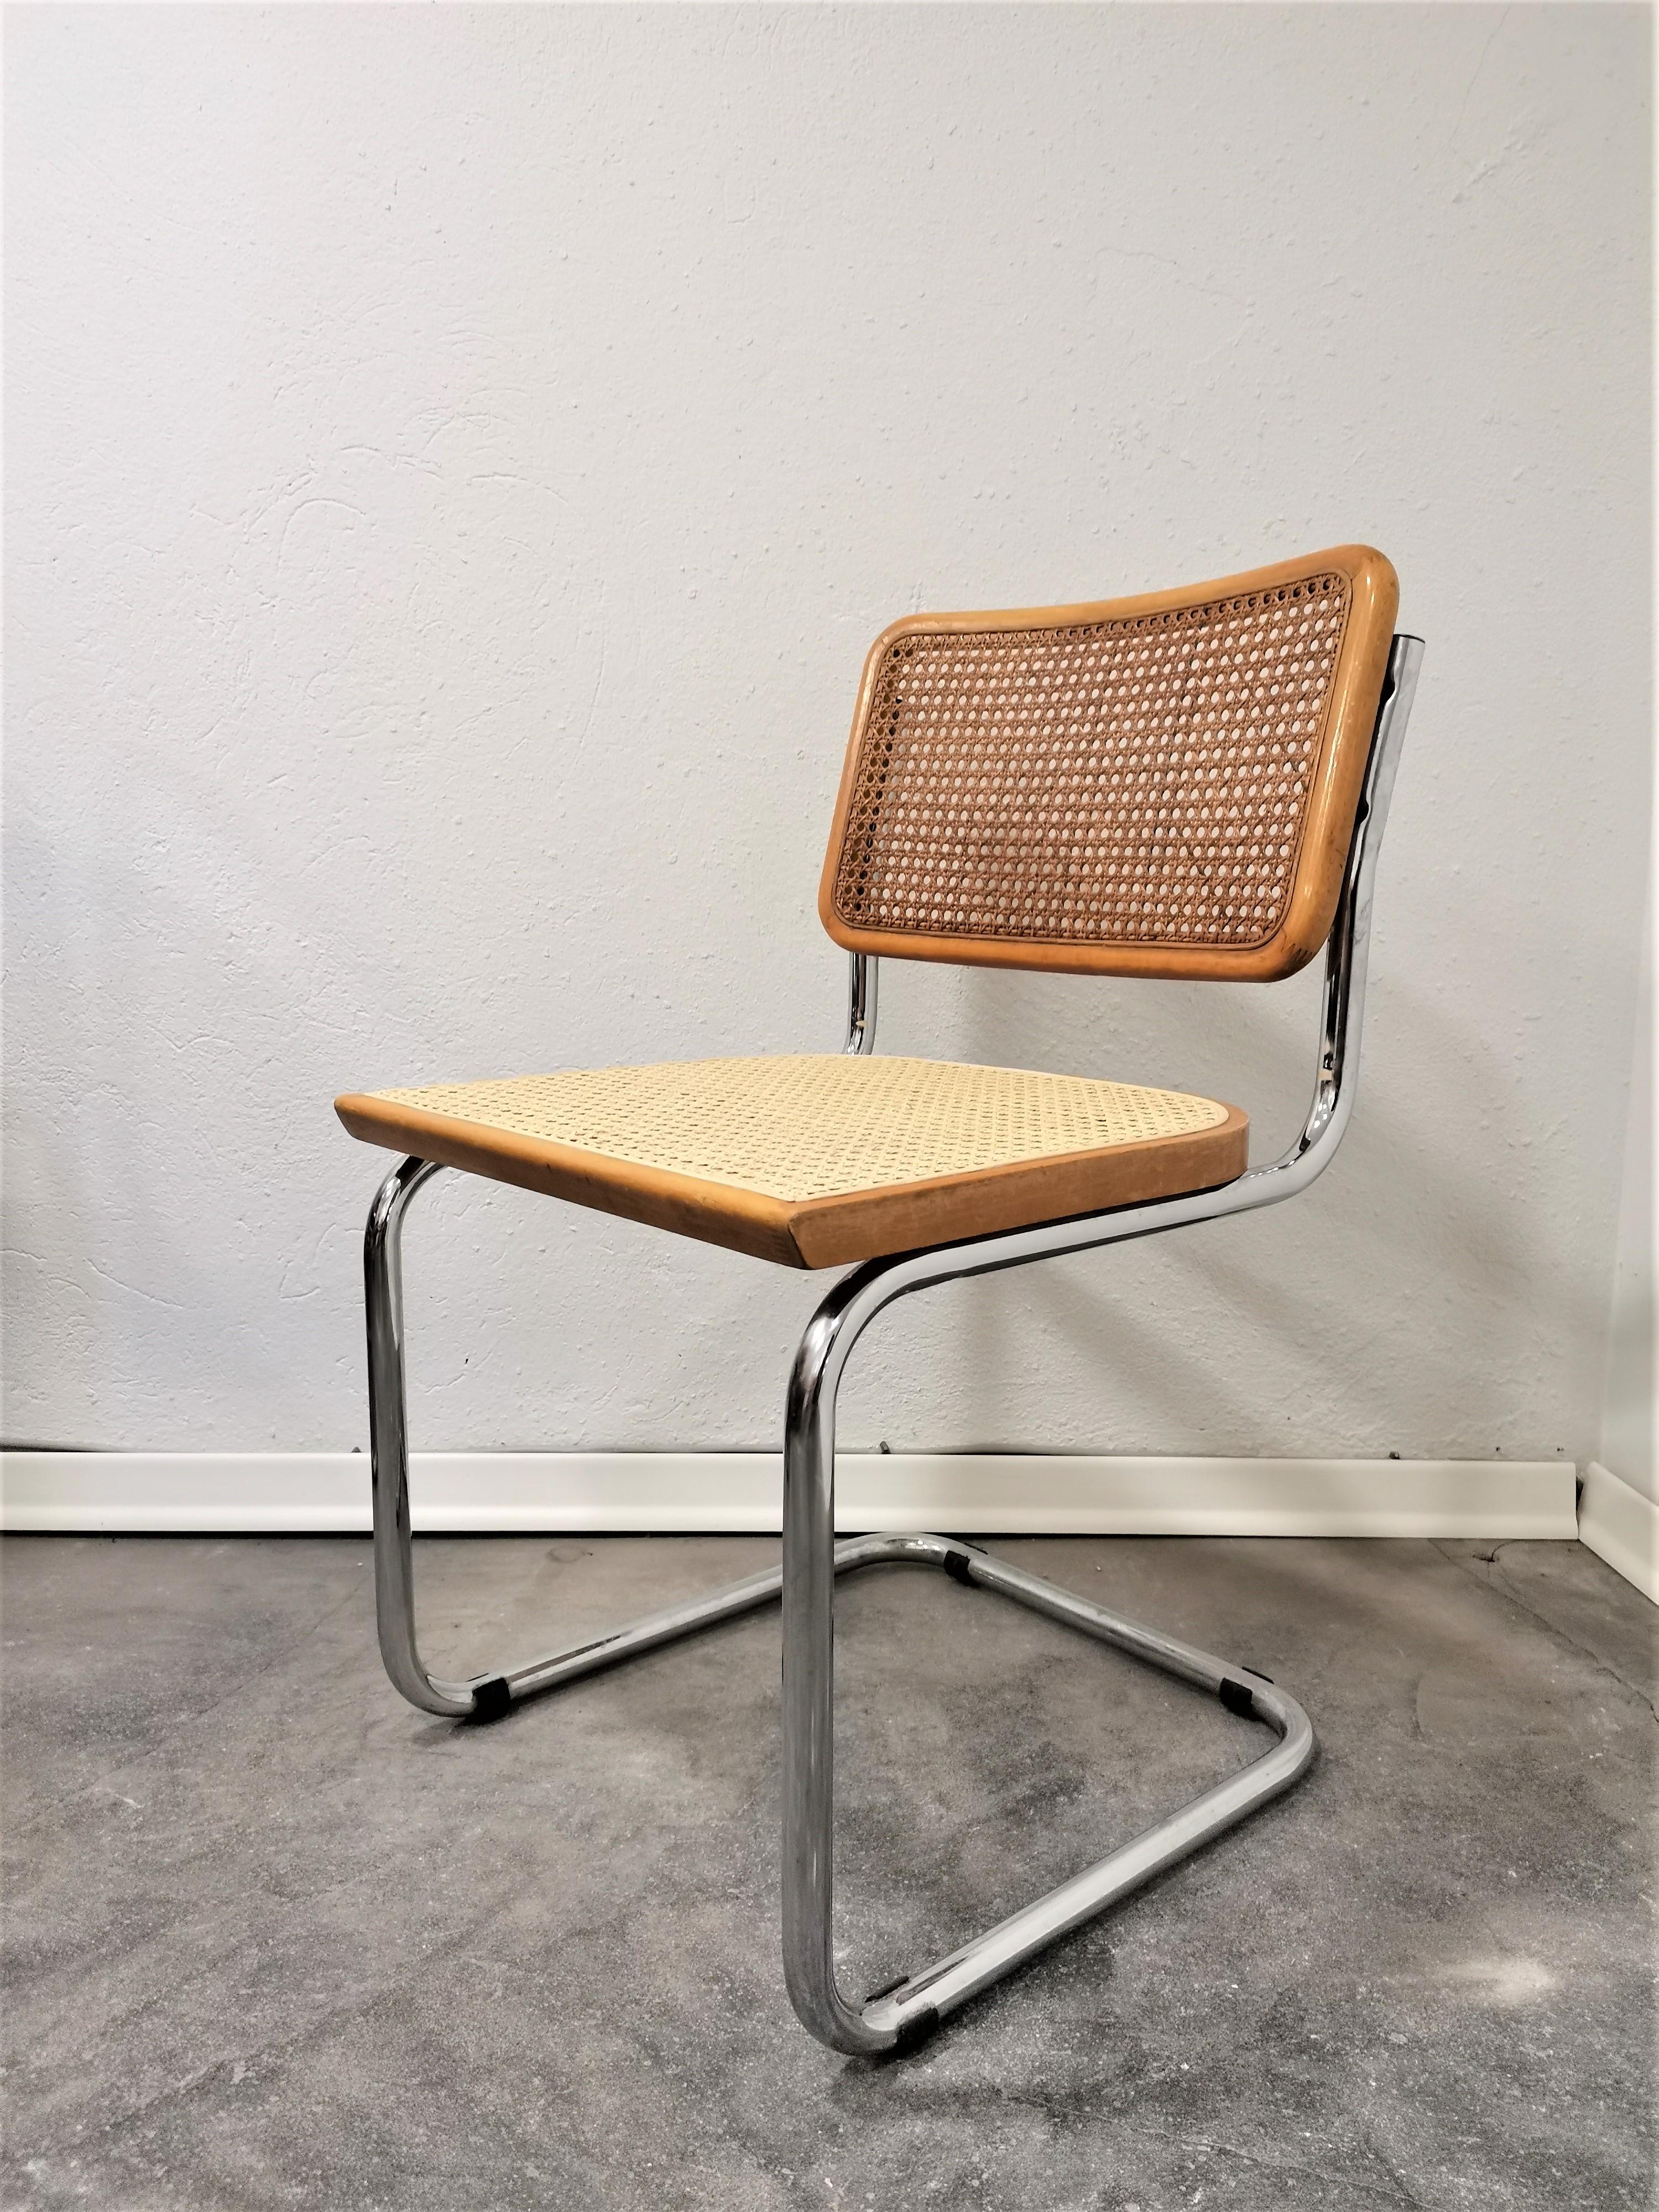 Cesca Chair

Period: 1980s

Style: midcentury modern, classic

Materials: wood, cane webbing, chromed metal frame

Colours: natural wood

Condition: Original vintage condition, signs of age and use, beautiful patina

Dimensions: H=79cm, W=46cm,